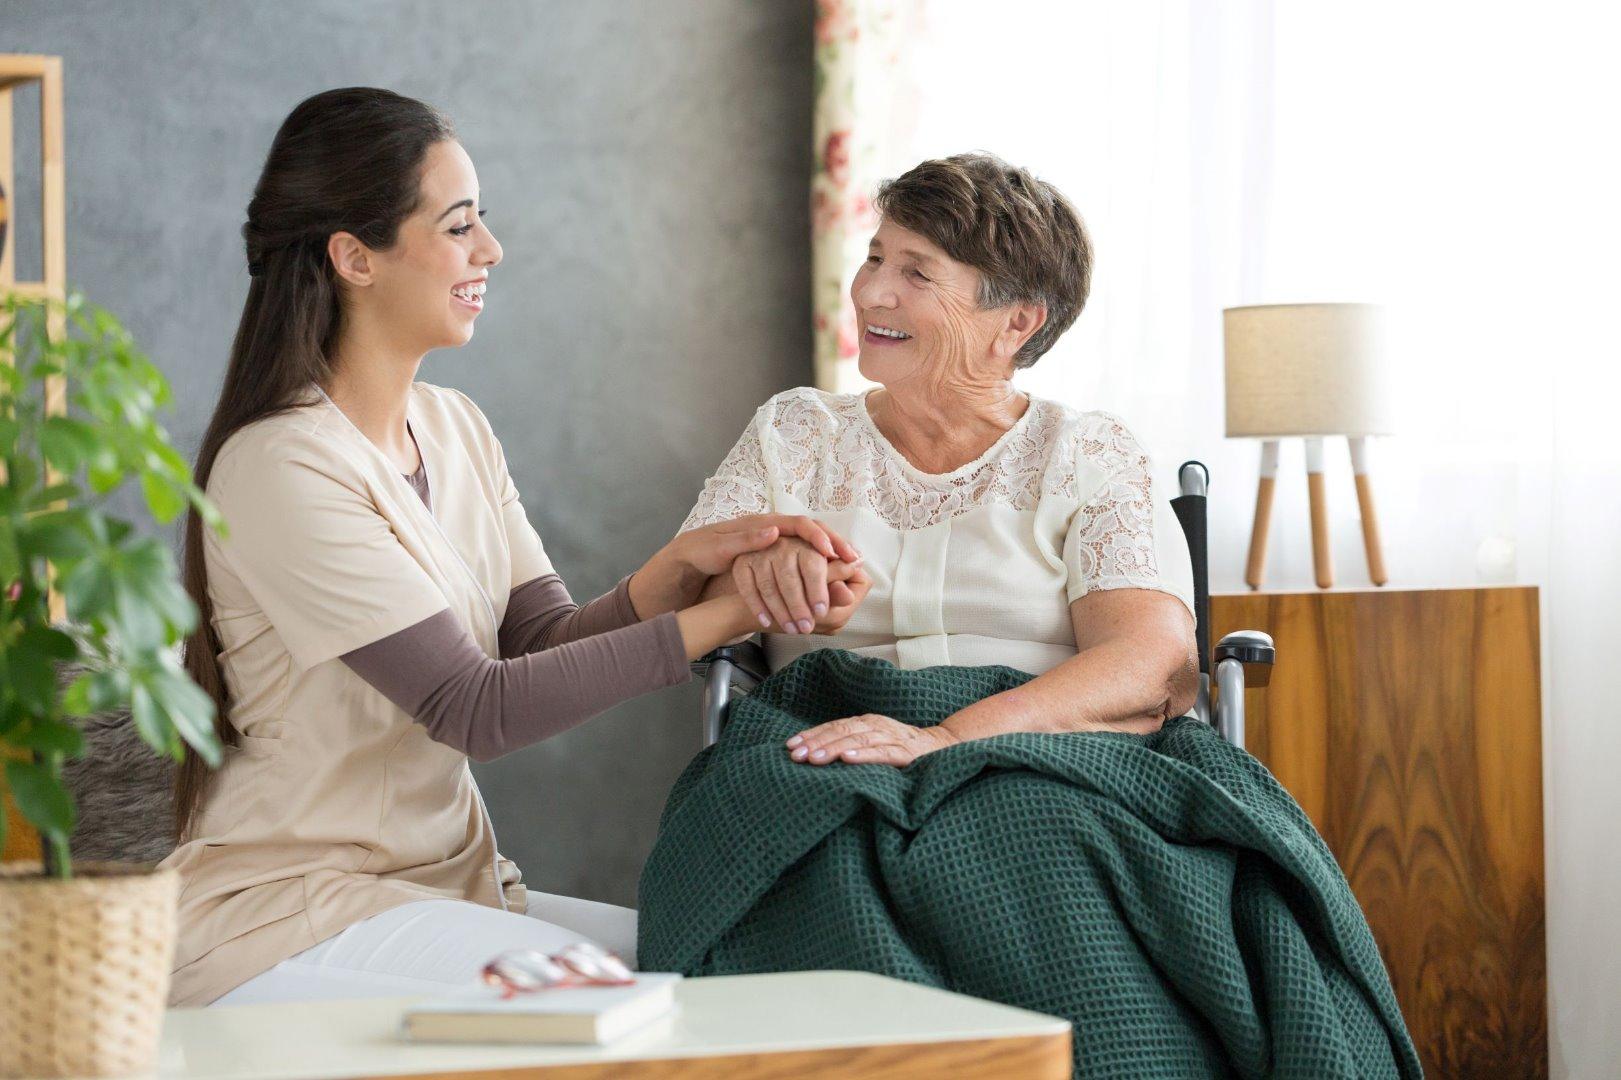 UNDERSTANDING HOME HEALTH CARE SERVICES